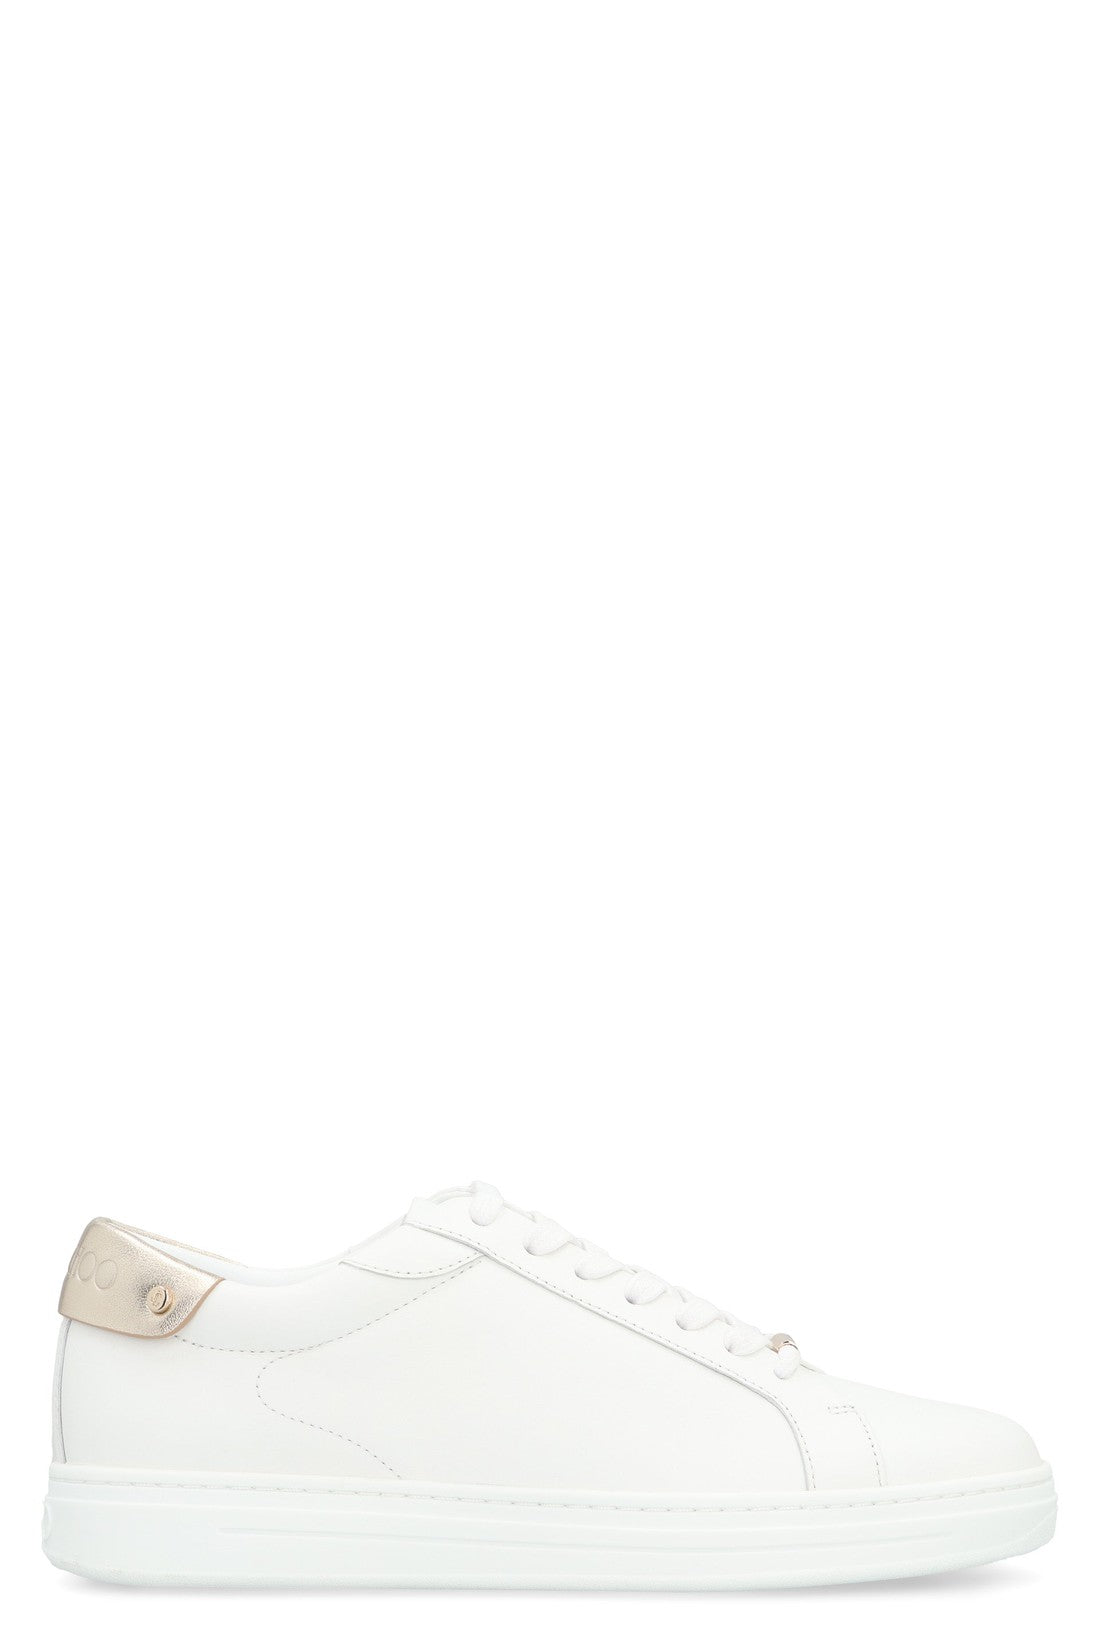 Jimmy Choo-OUTLET-SALE-Rome/F leather sneakers-ARCHIVIST